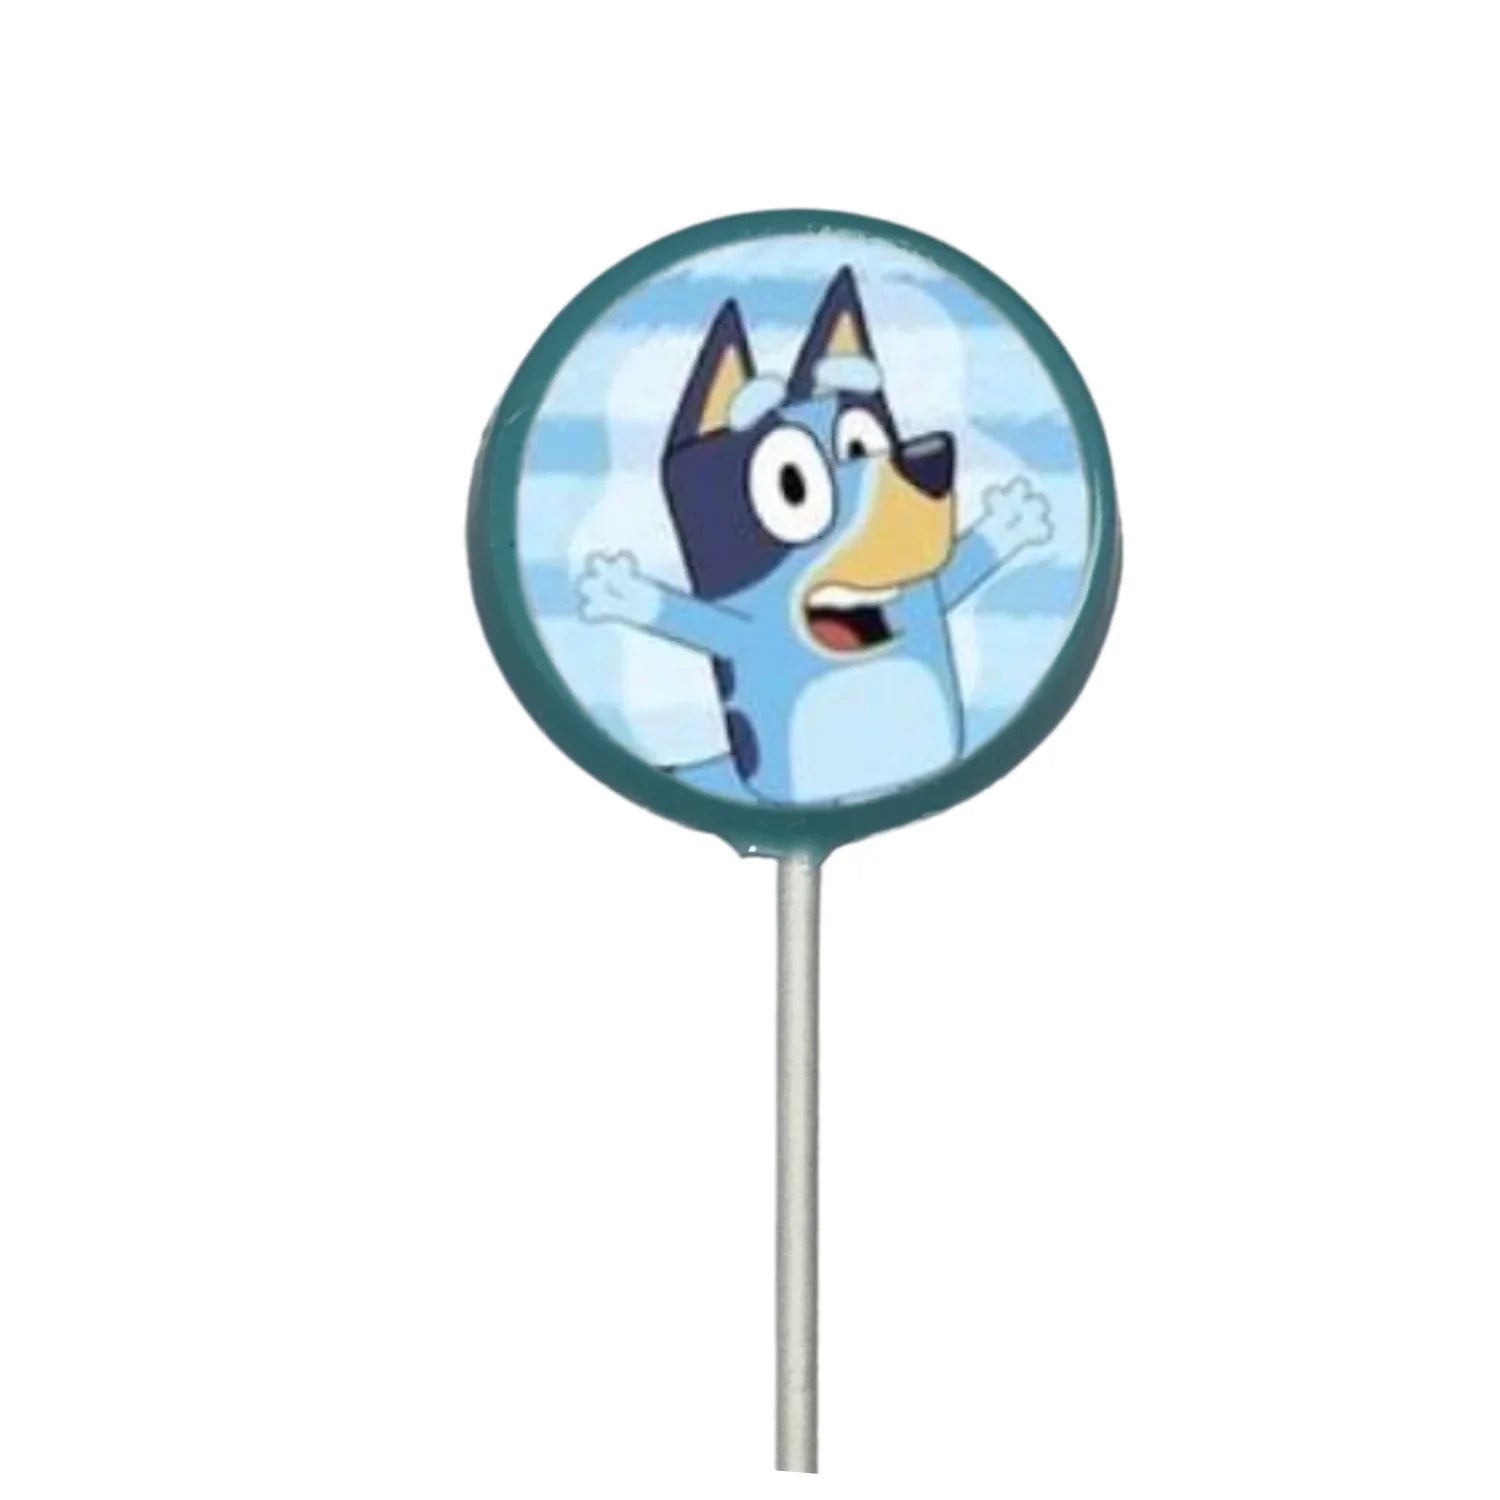 Edible Bluey Characters Images White Chocolate Lollipop Suckers .75 oz 2 inch